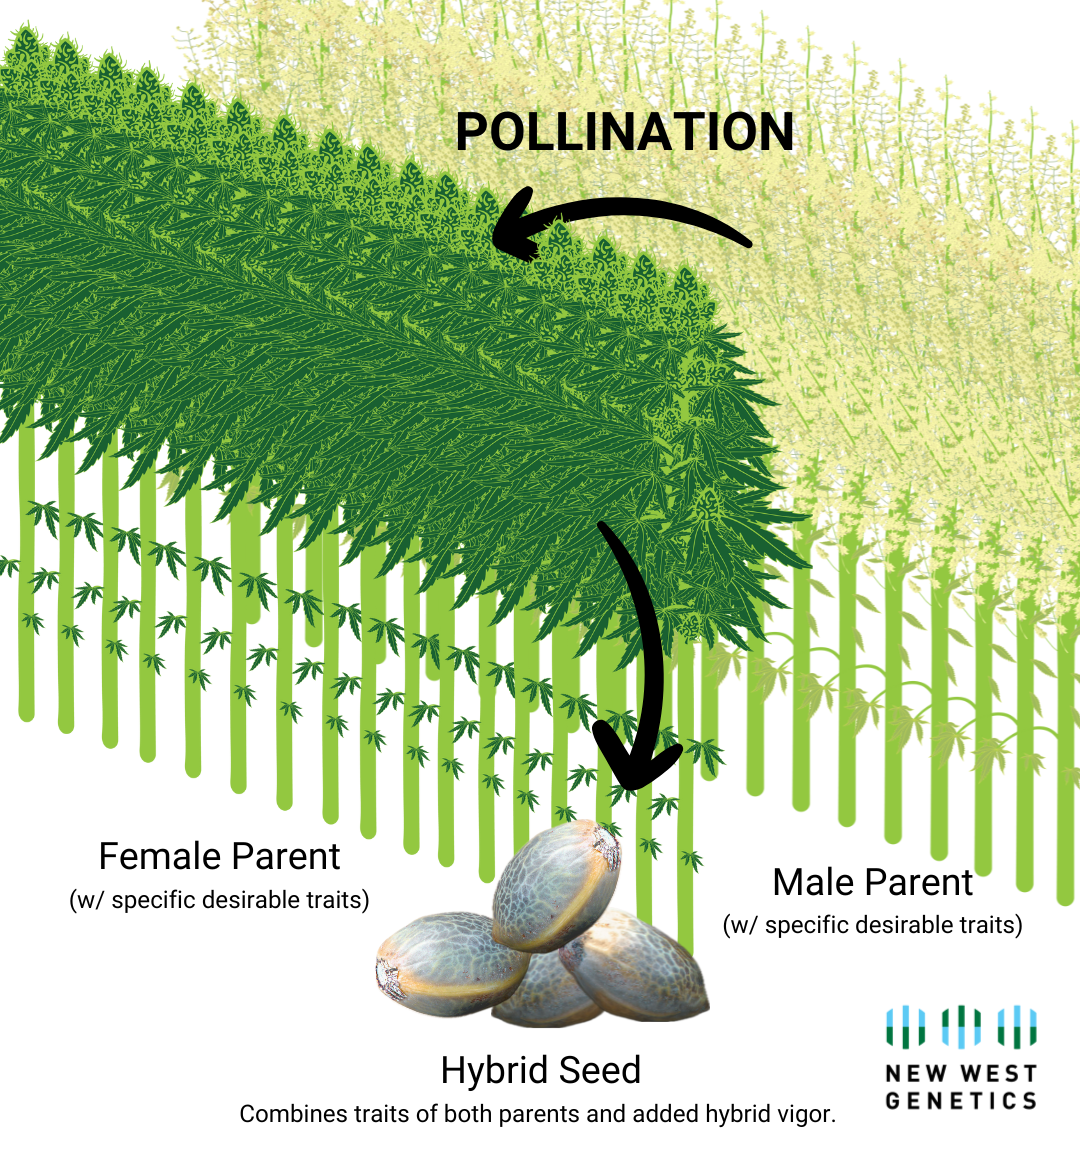 NWG AMPLIFY Hybrid hemp seed graphic that shows the male and female parents in hybrid hemp production